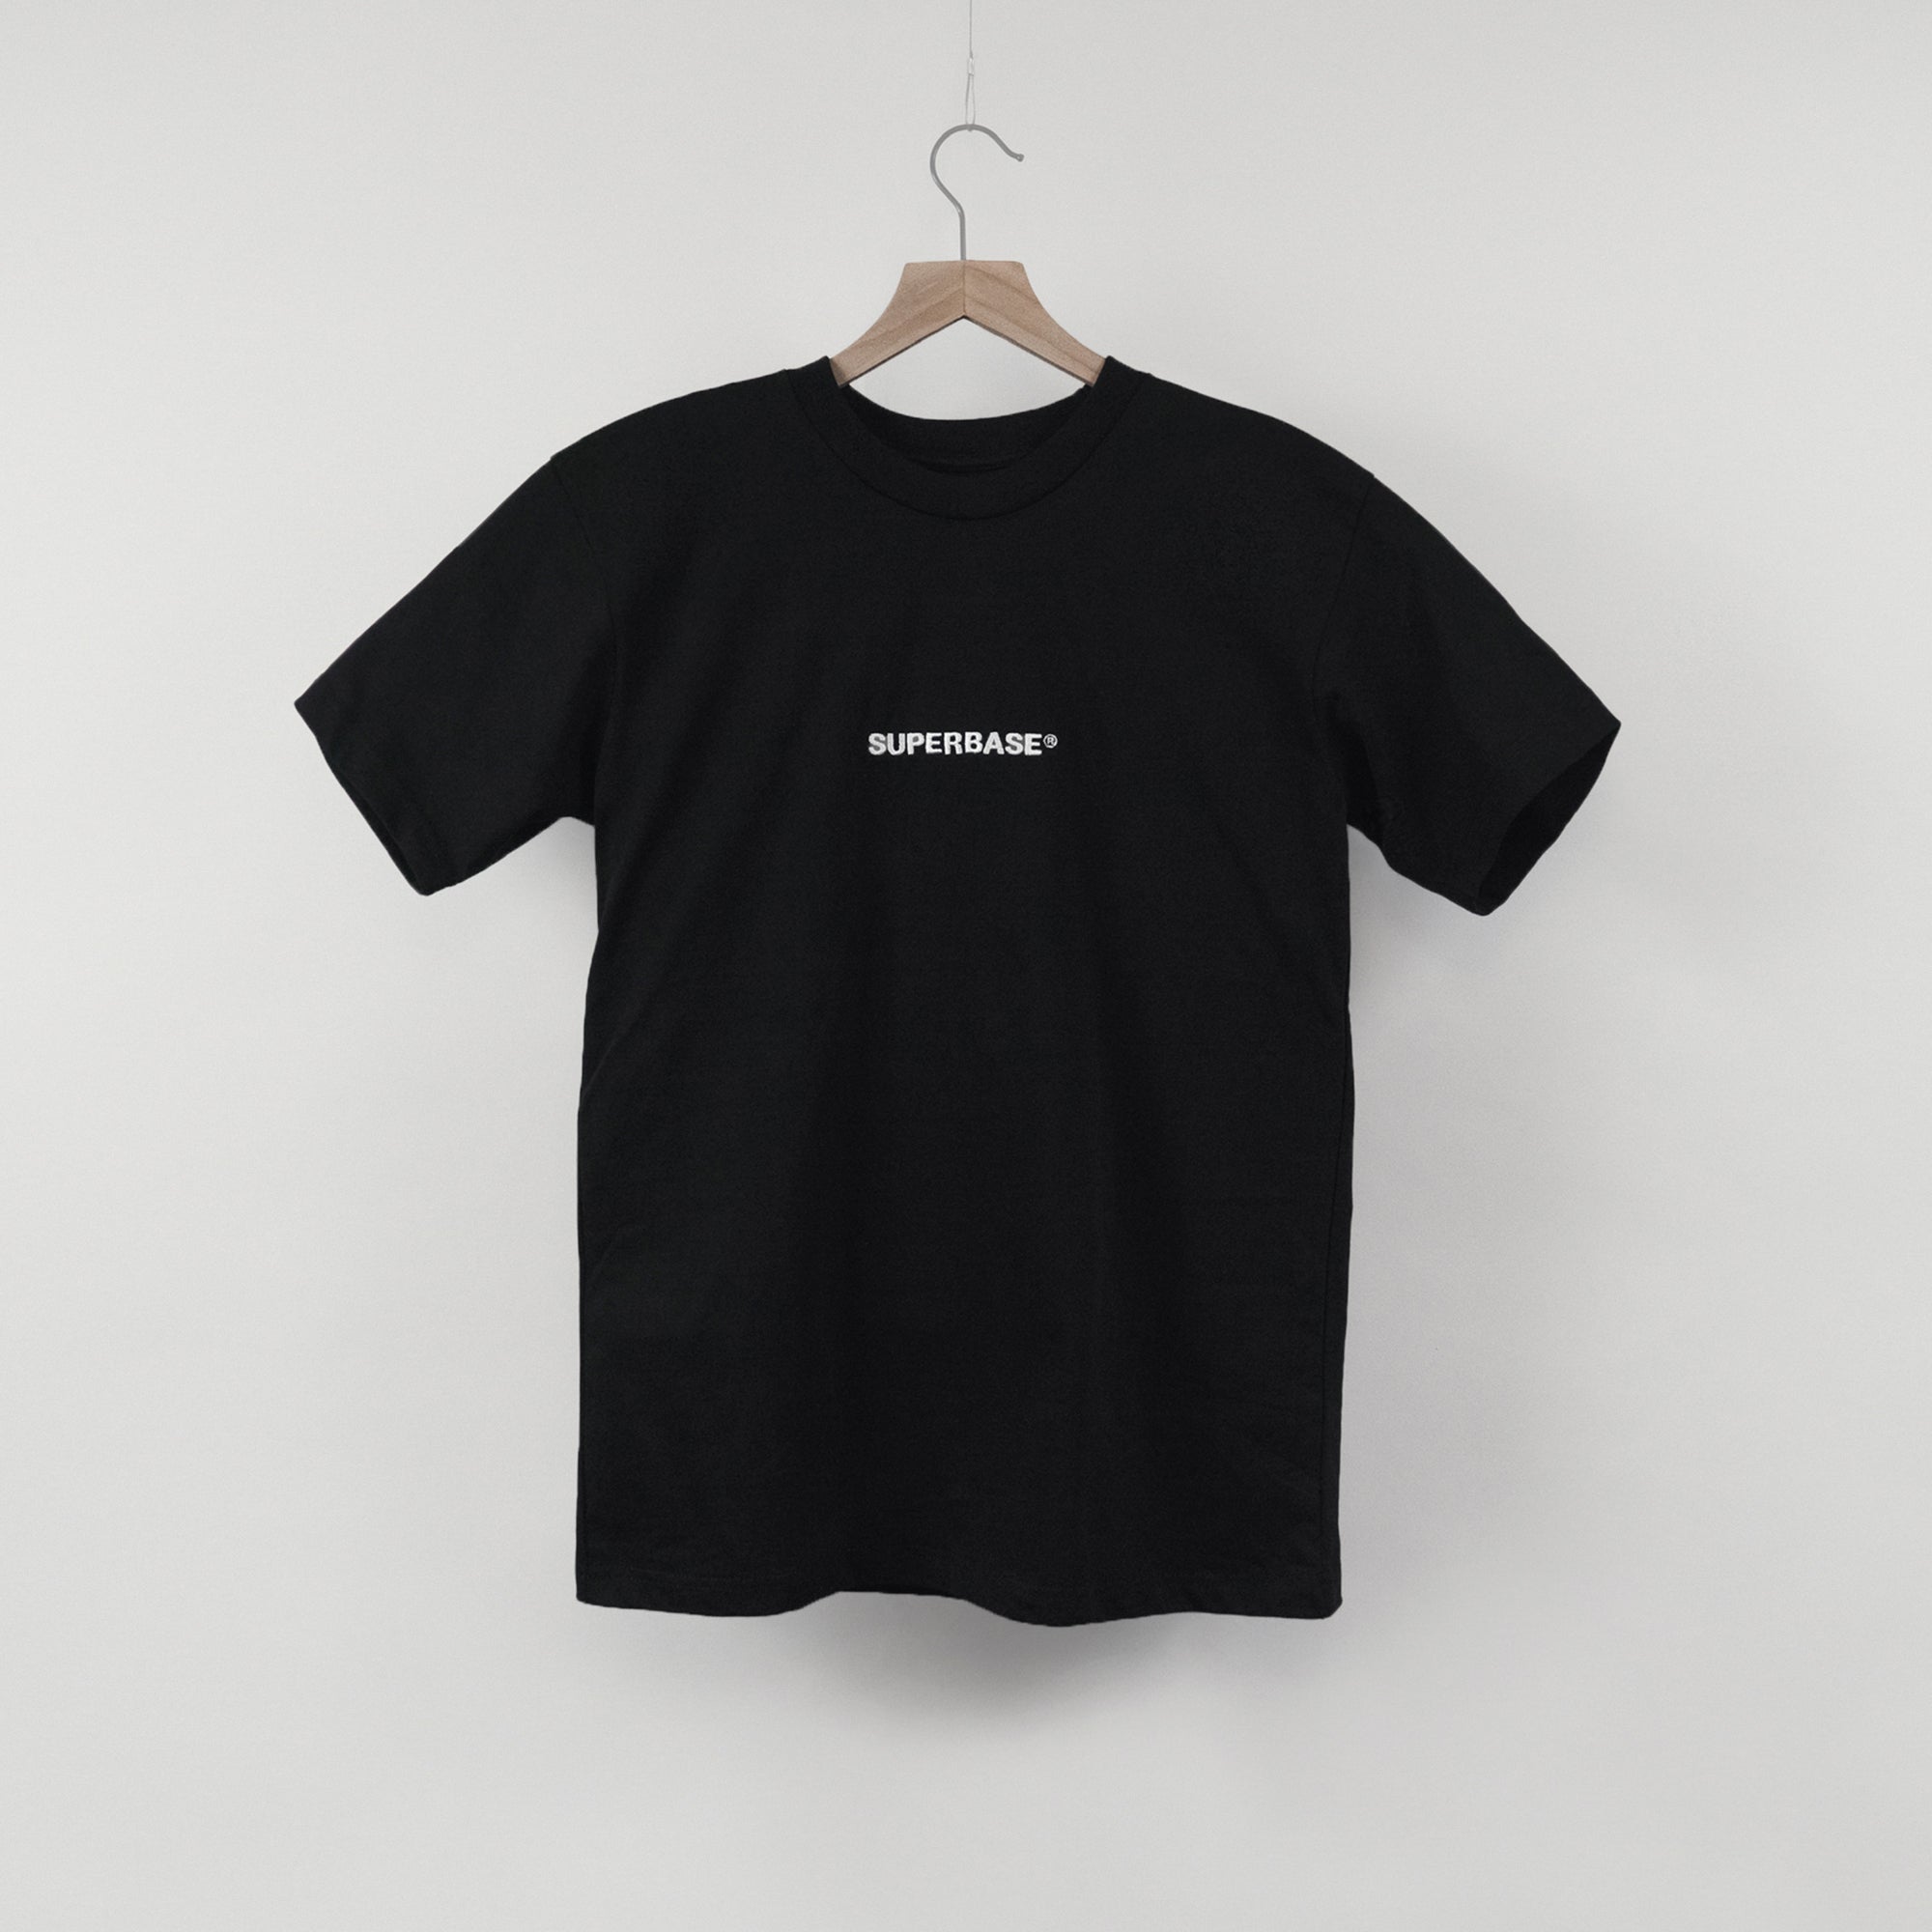 Superbase Embroidered Thicc Knit Tee (Black)